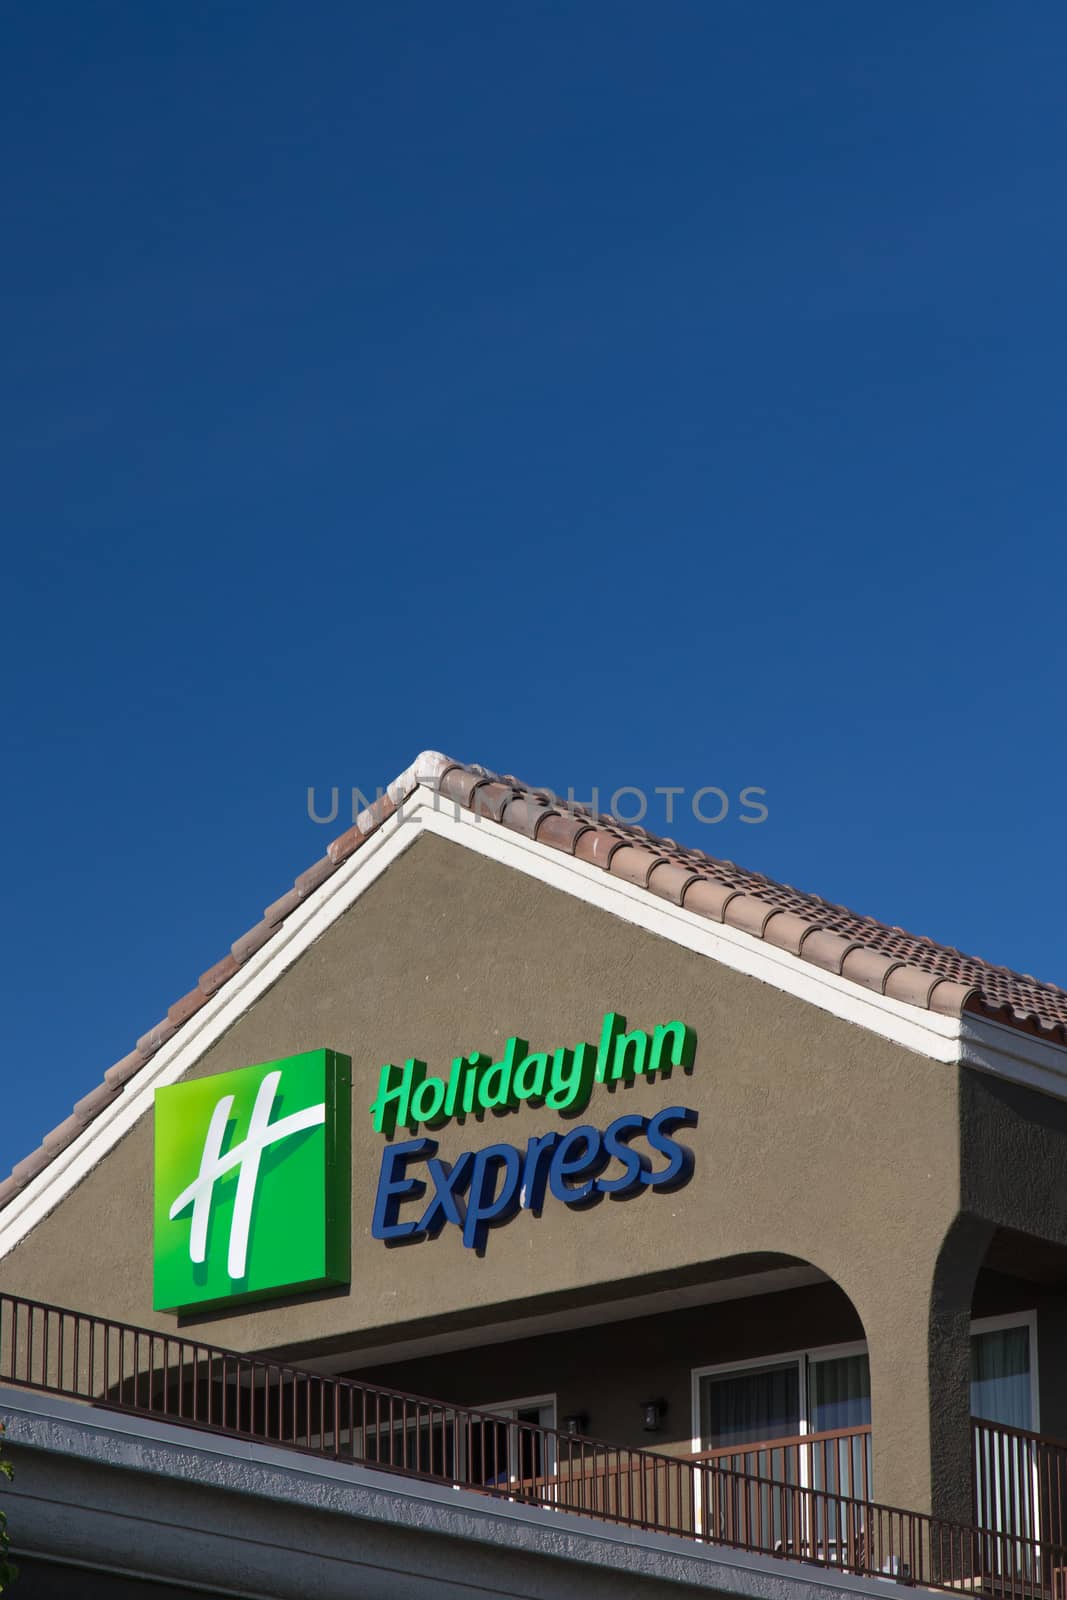 Holiday Inn Express Sign at night by wolterk